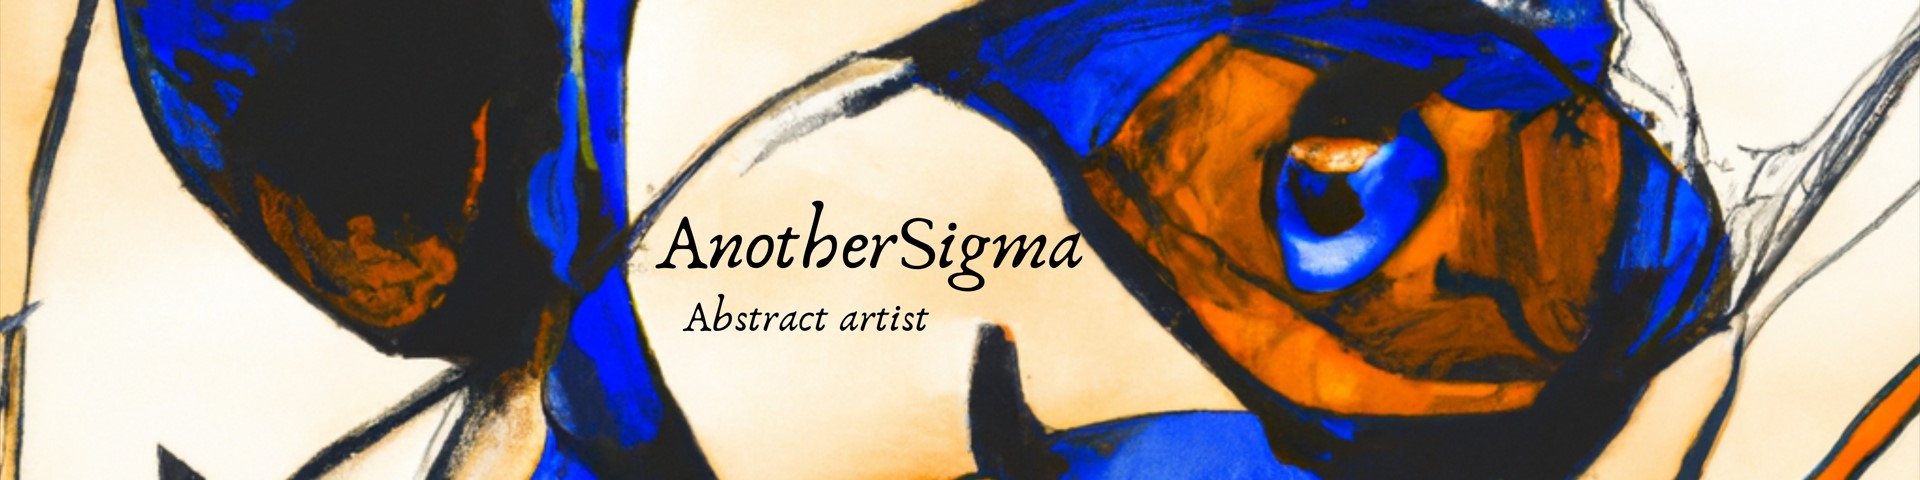 AnotherSigma banner